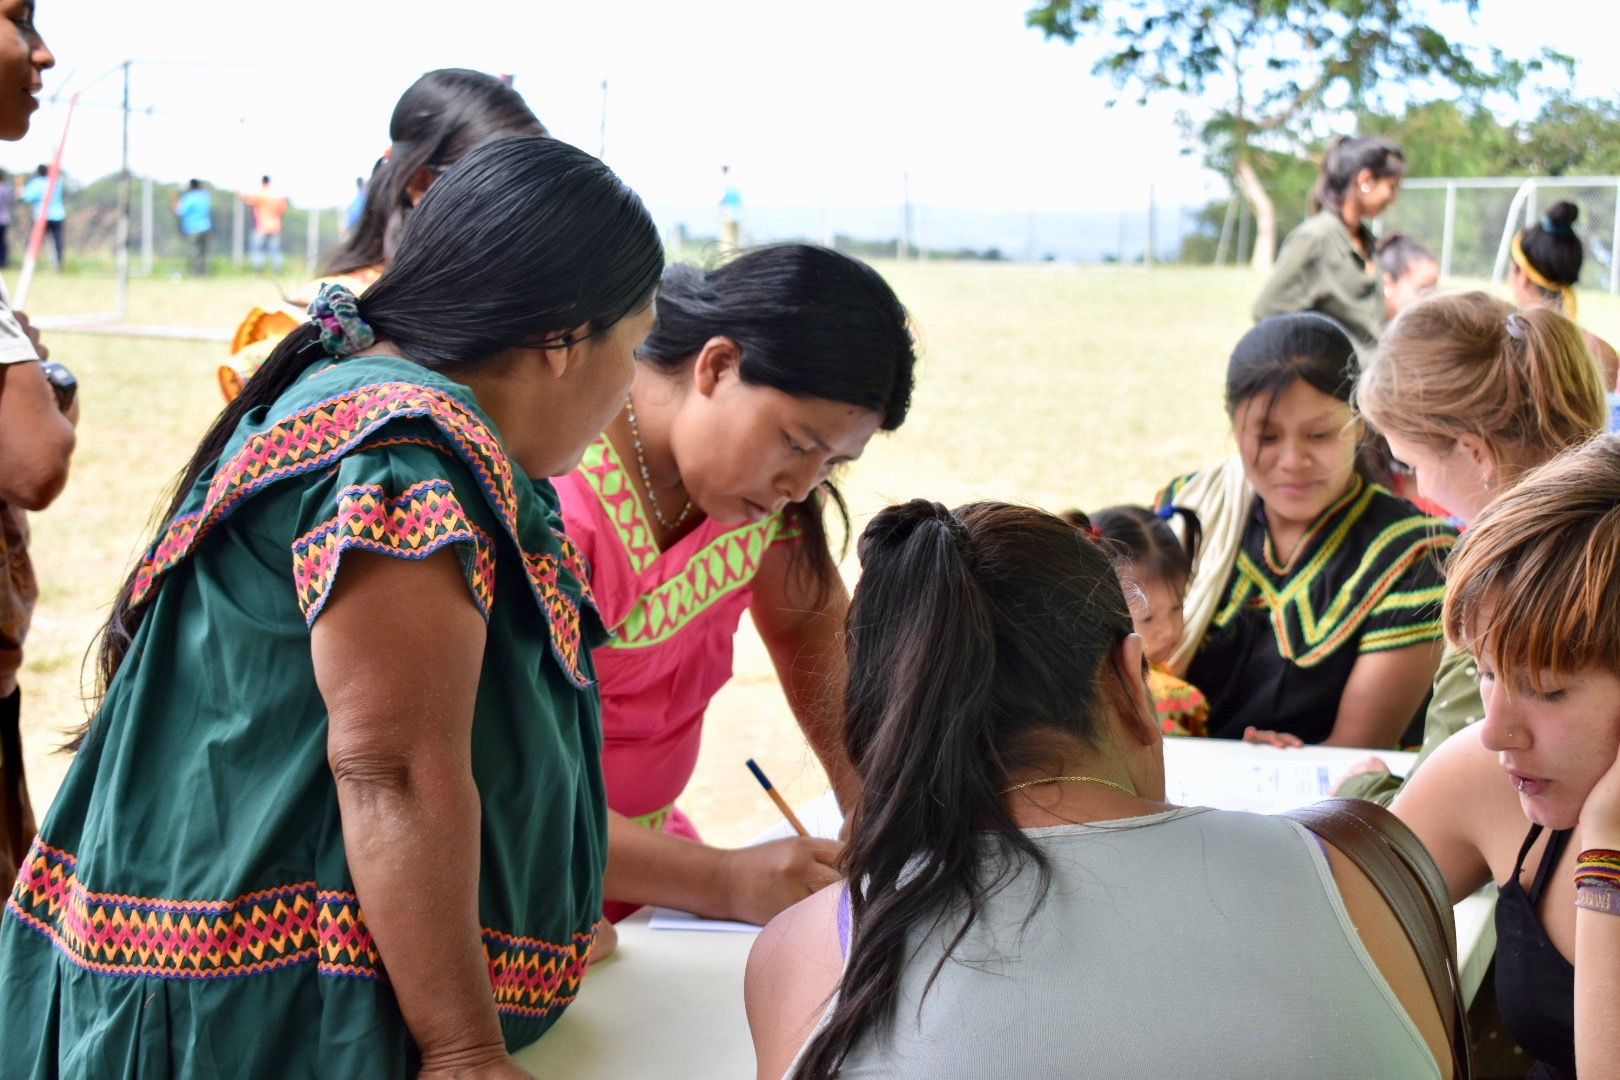 Efforts to support the Ngäbe-Buglé population increase access to crucial services and new cultures. Daisy, a cultural adviser, explains medical information to Ngäbe-Buglé women who may not understand Spanish. Image by Samira Tella. Costa Rica, 2018.